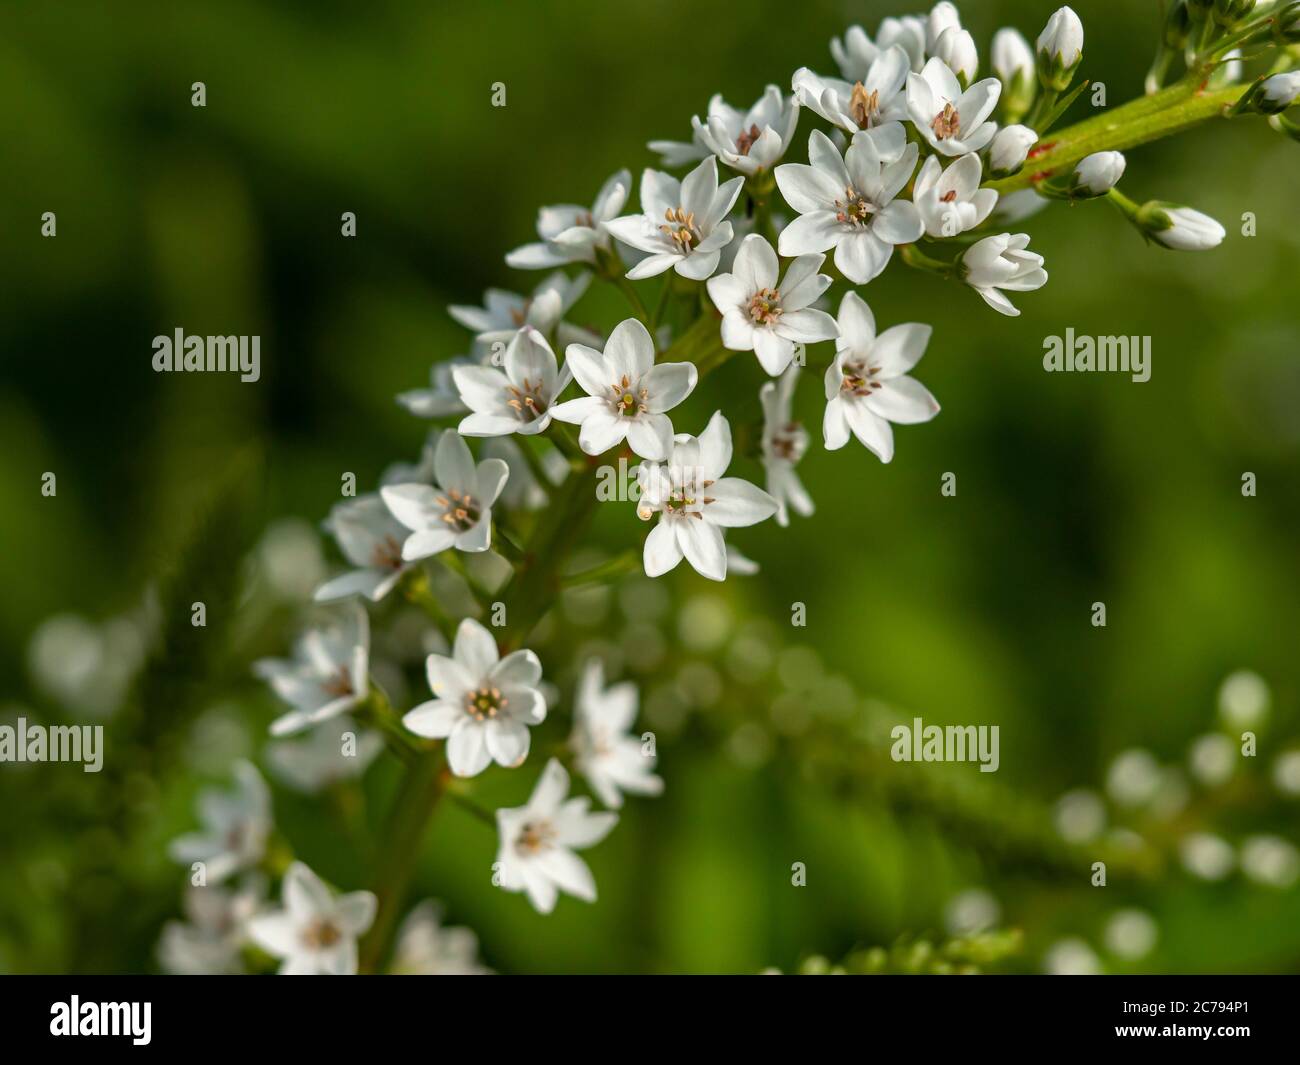 White Lysimachia High Resolution Stock Photography and Images - Alamy